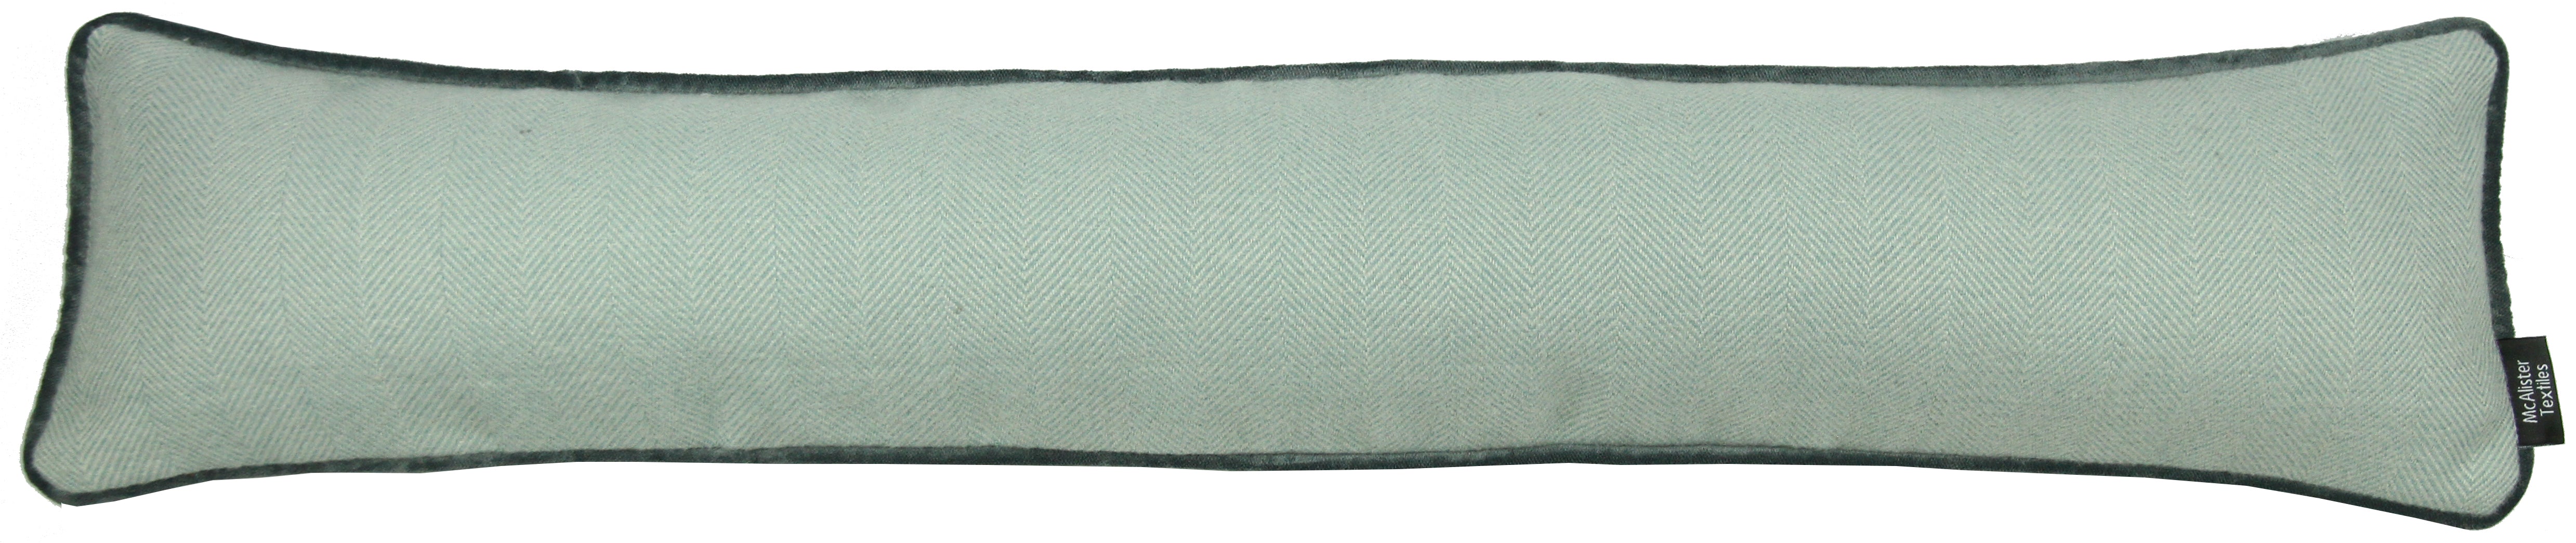 Herringbone Boutique Duck Egg Blue Draught Excluder